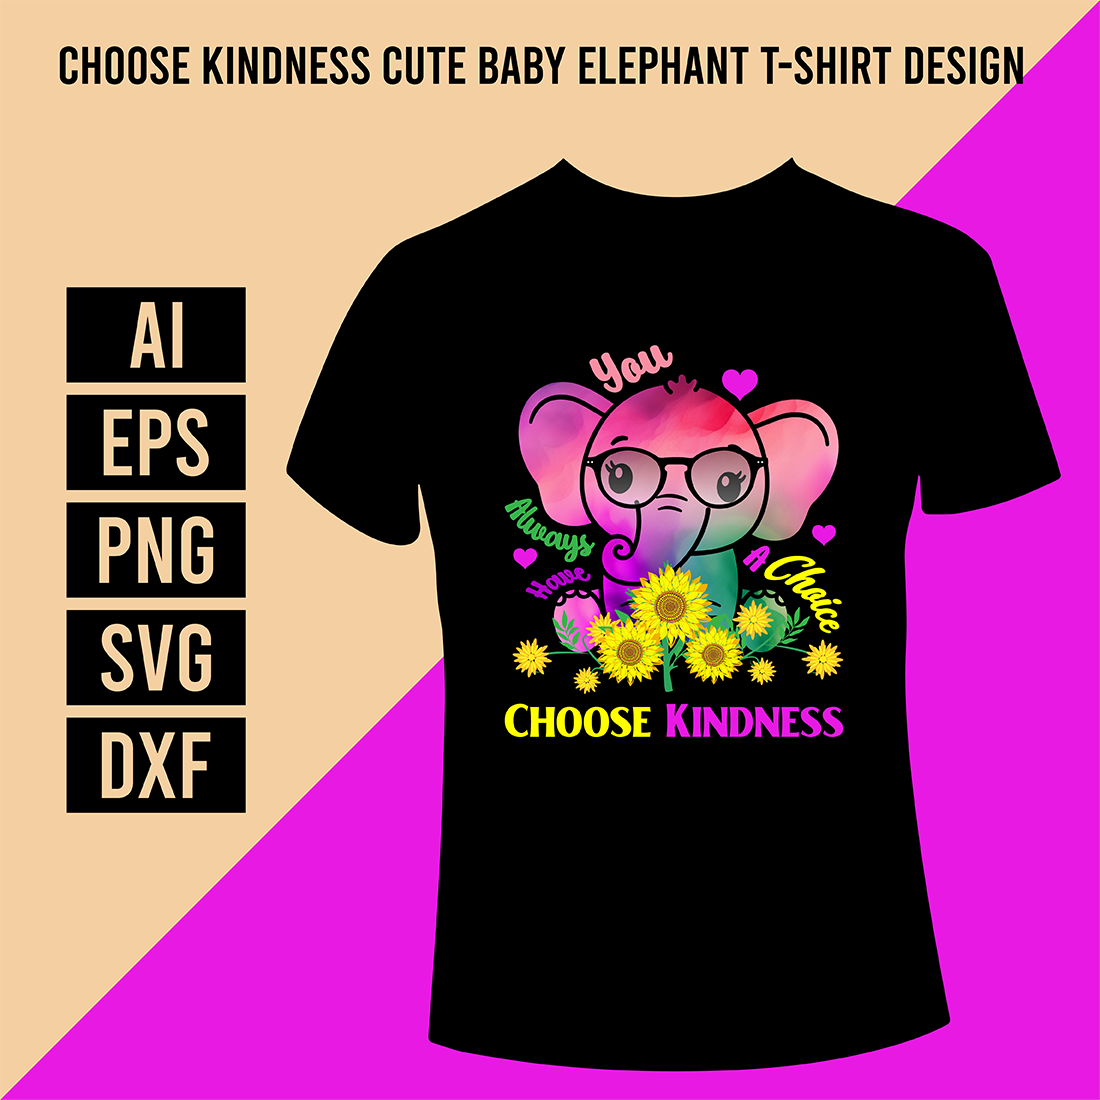 Choose Kindness Cute Baby Elephant T-Shirt Design cover image.